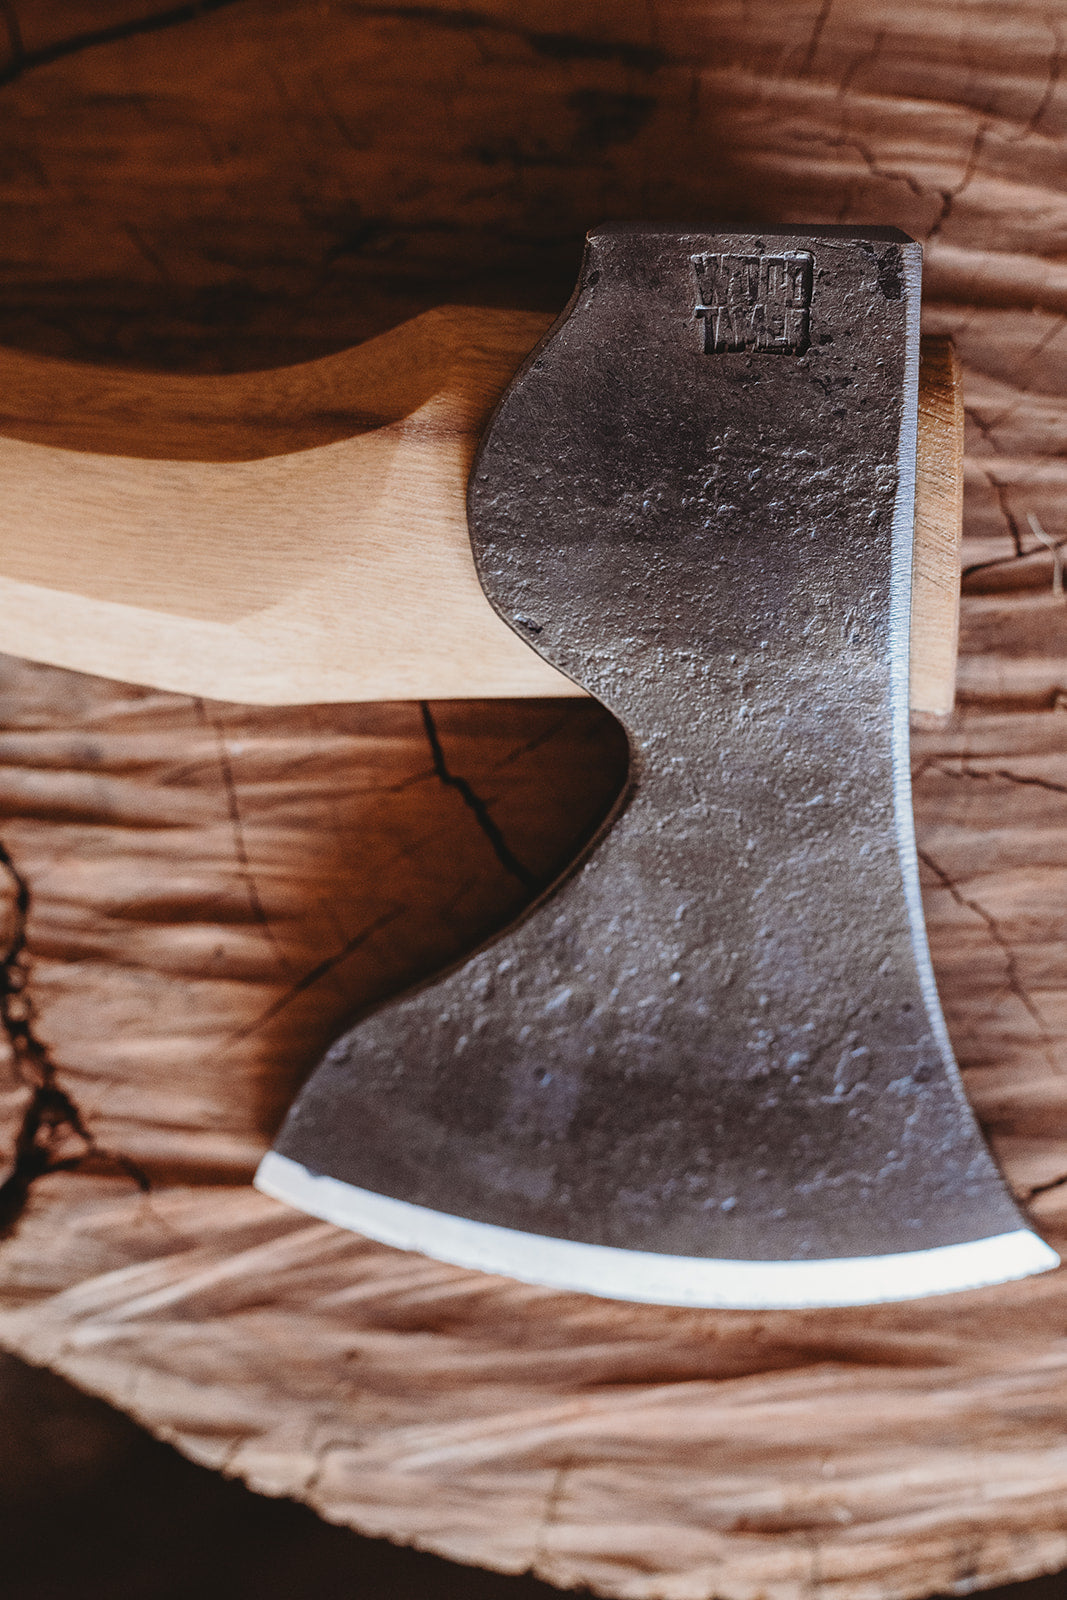 The Robin Wood Carving Axe